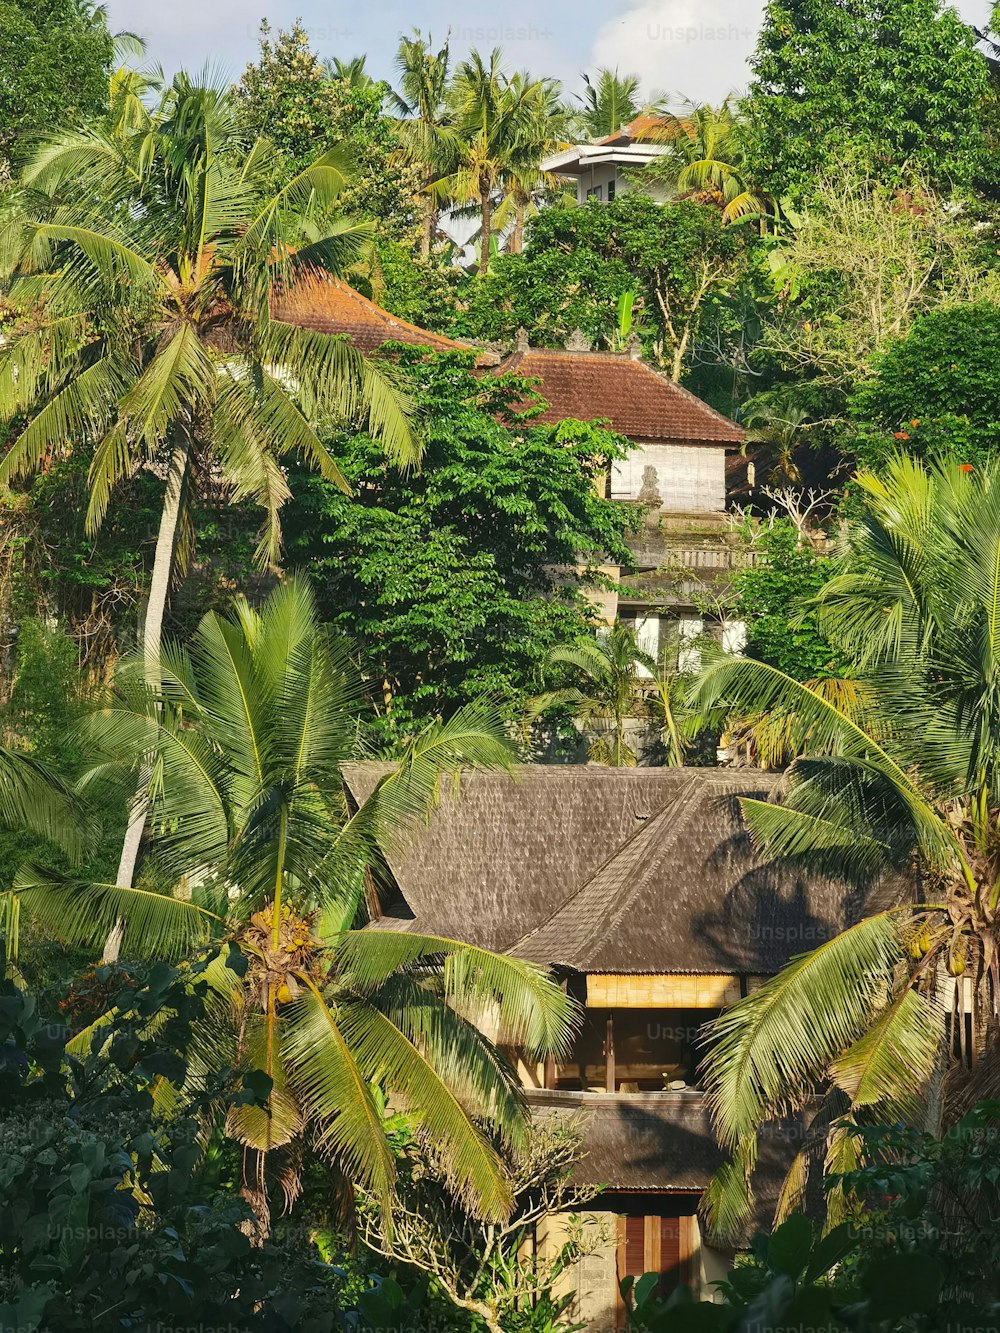 An emerald-green hillside, lush with trees and abundant palm leaves, basking in the warm sunlight.